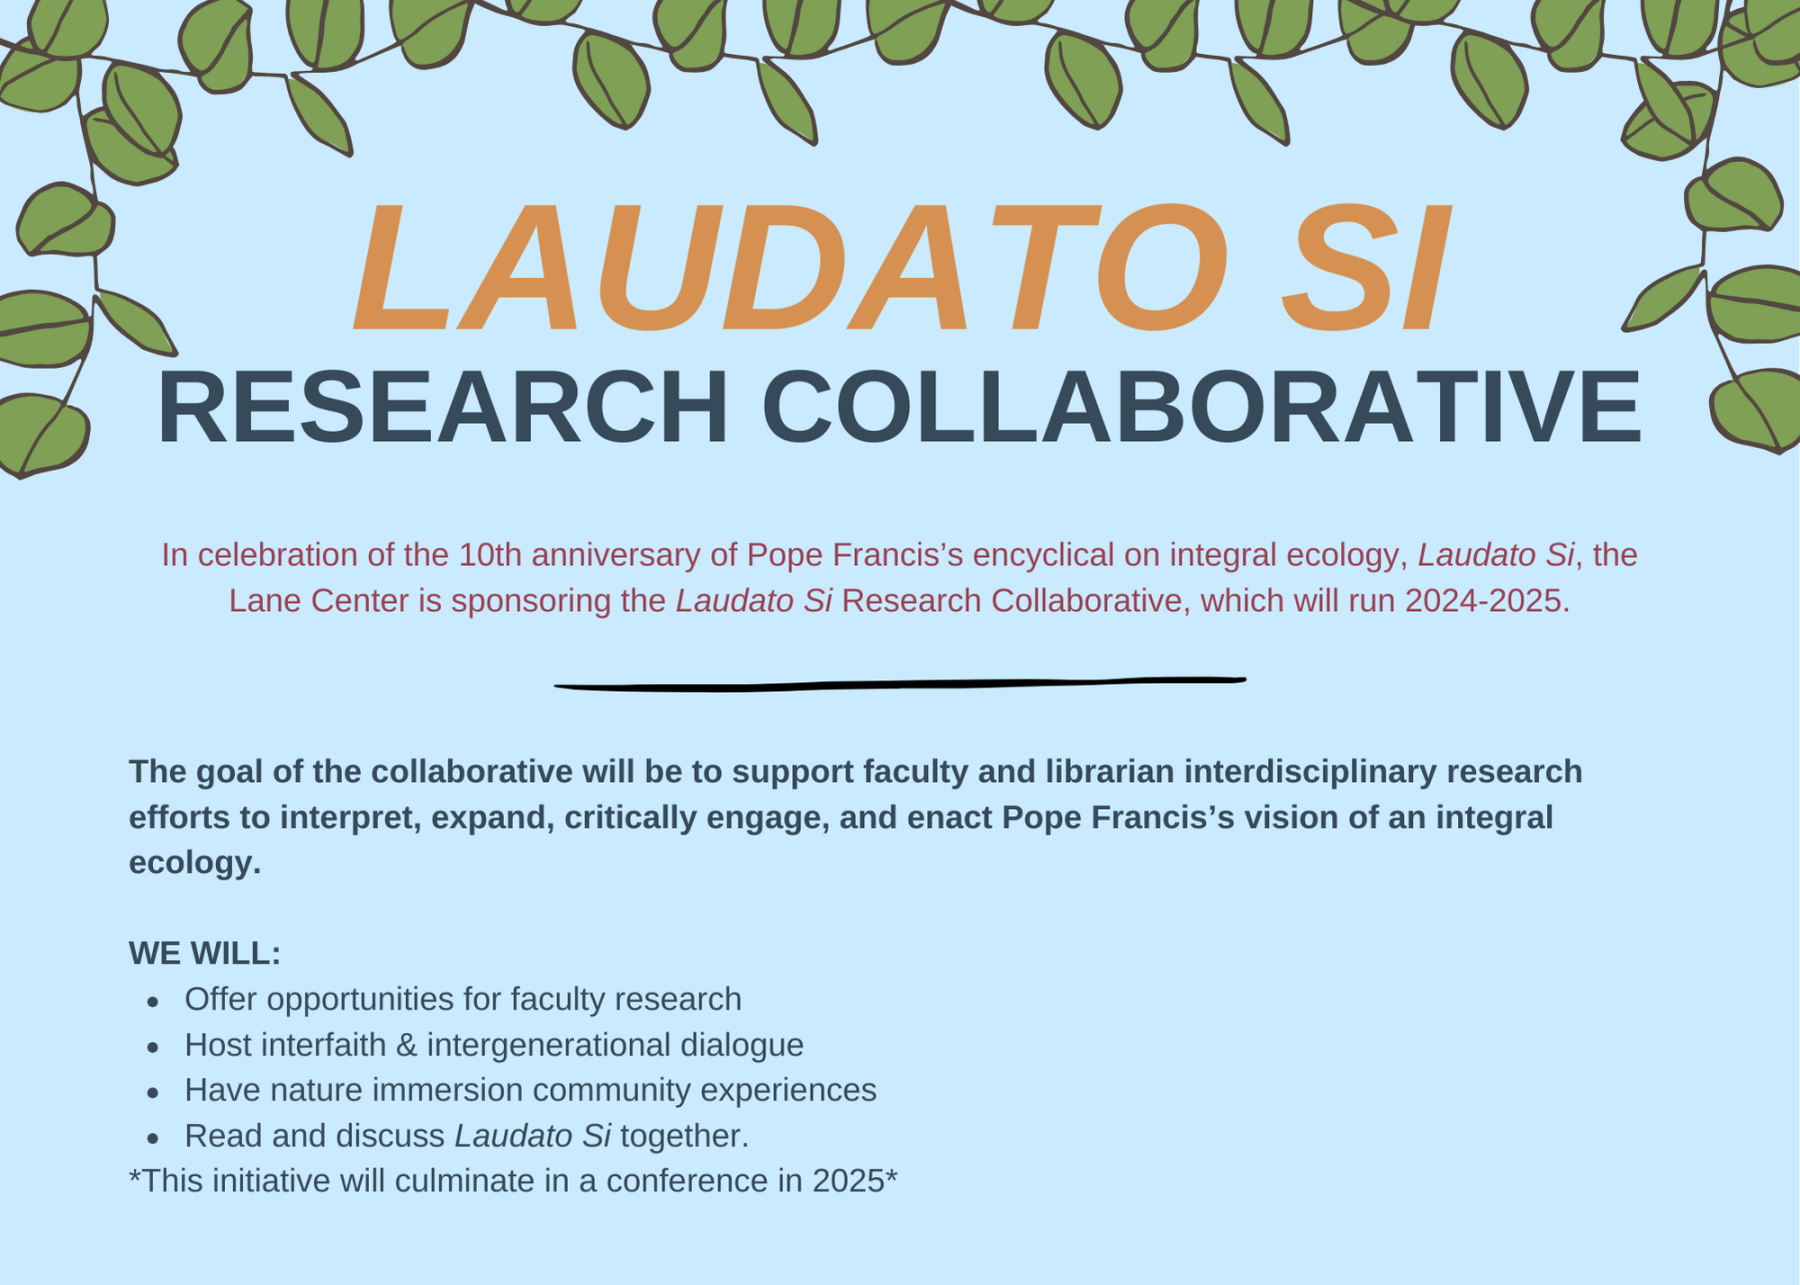 blue flyer with decorative vines and text that explains Laudato Si' Research Collaborative's intent to support faculty and librarian interdisciplinary research efforts to interpret, expand, critically engage, and enact Pope Francis's vision of an integral ecology